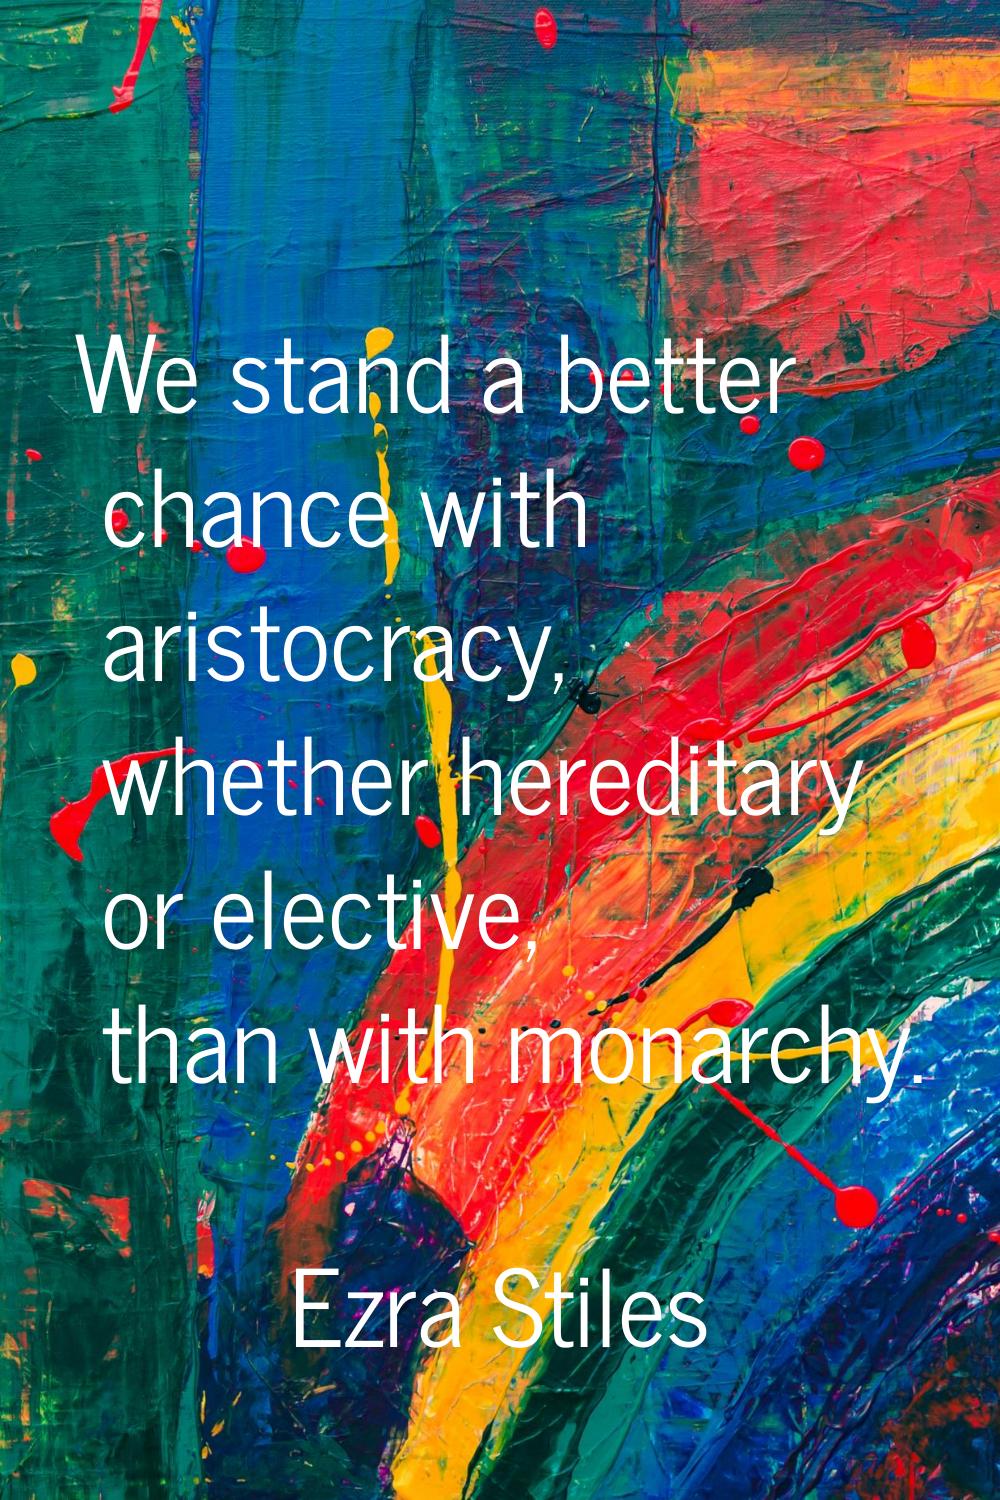 We stand a better chance with aristocracy, whether hereditary or elective, than with monarchy.